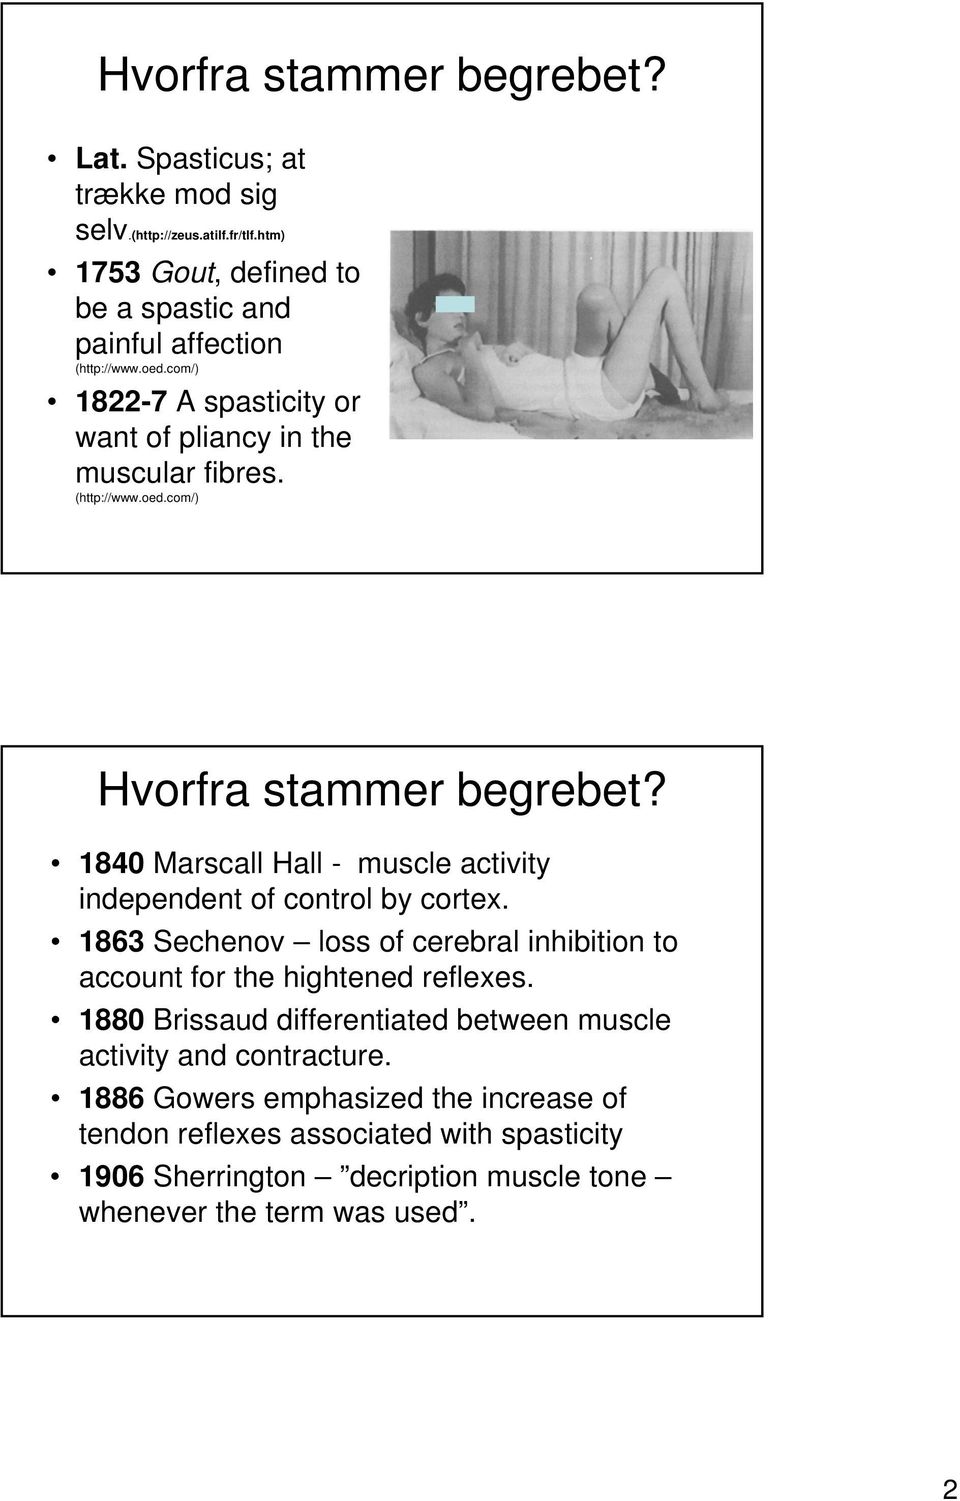 1840 Marscall Hall - muscle activity independent of control by cortex. 1863 Sechenov loss of cerebral inhibition to account for the hightened reflexes.